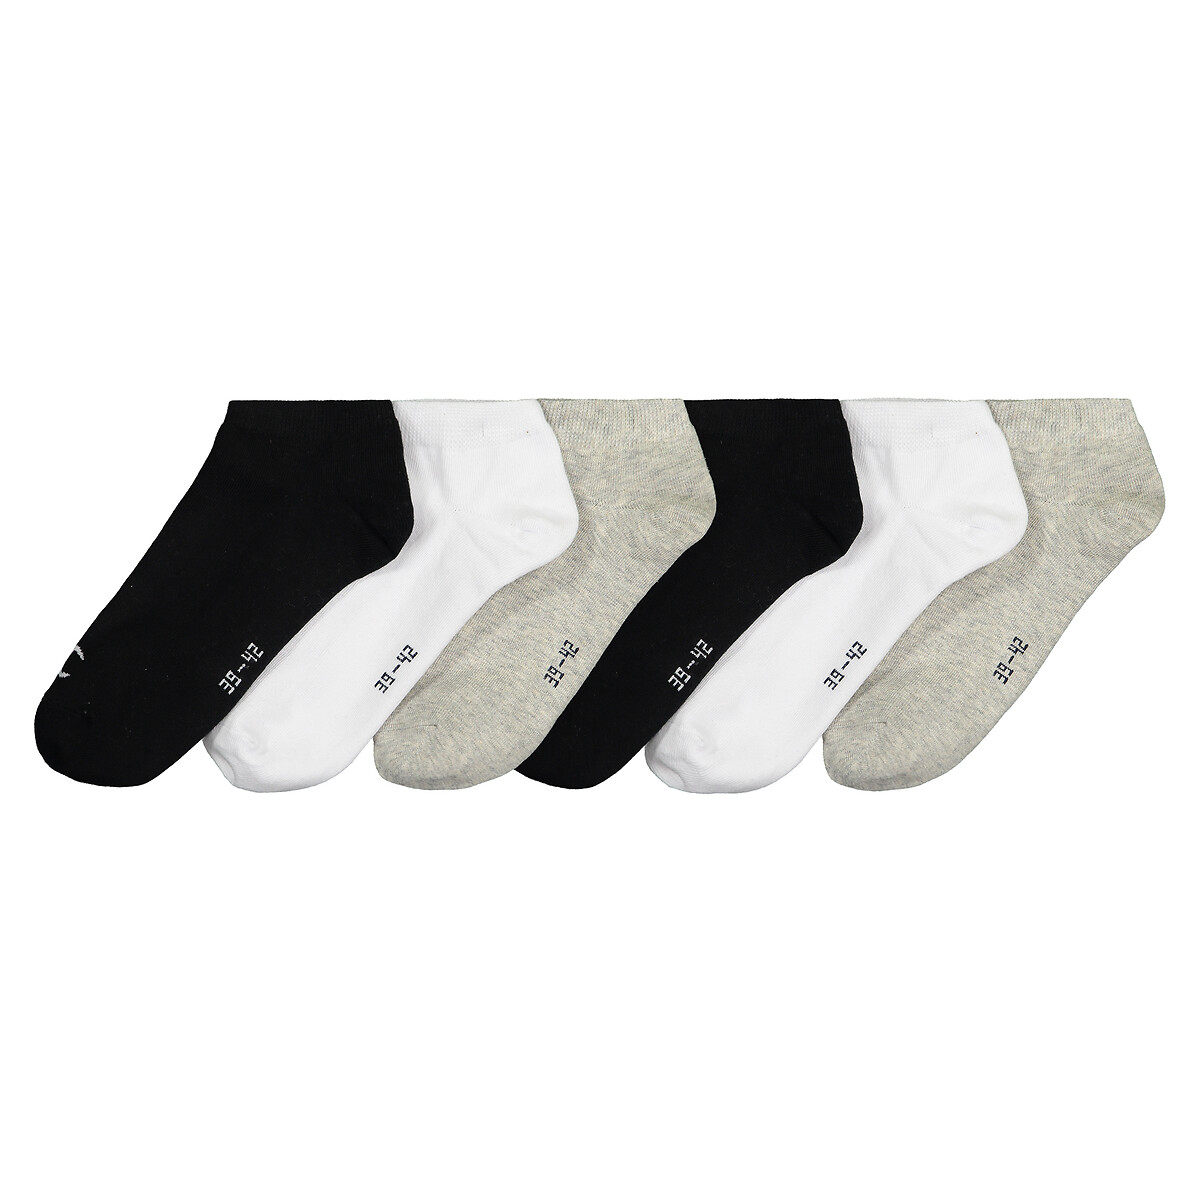 Image of Pack of 6 Pairs of Socks in Cotton Mix